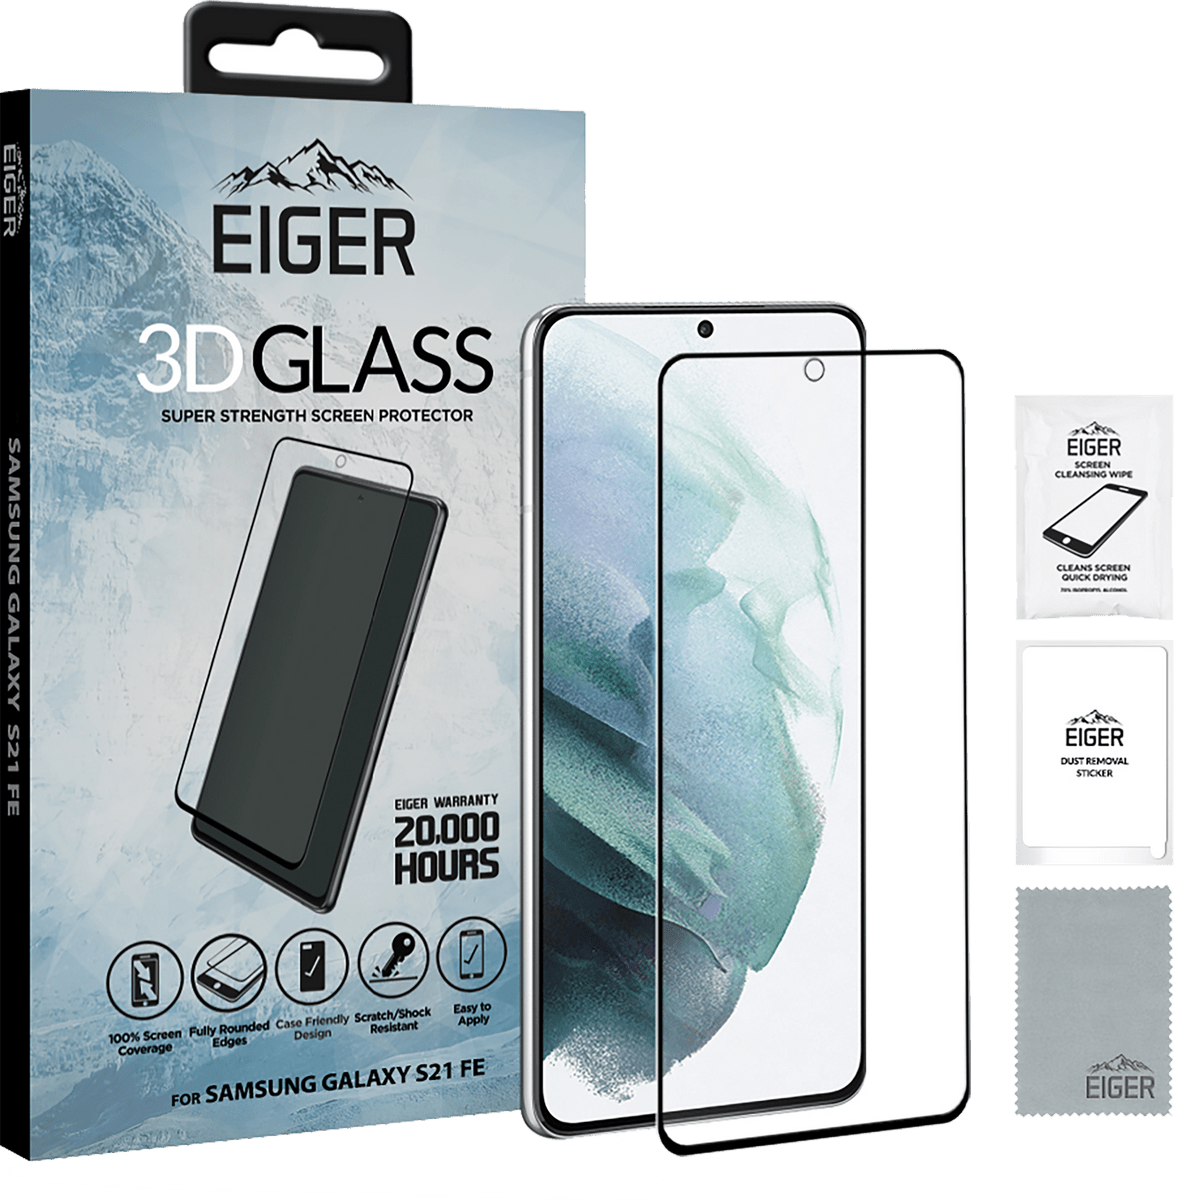 https://assets.mobilezone.ch/large/54c795f9b596a3c5e5c58535218bcbbb7ebfb951/samsung-galaxy-s21-fe-5g-screen-protector-3d-glas-black-side-front-left.png